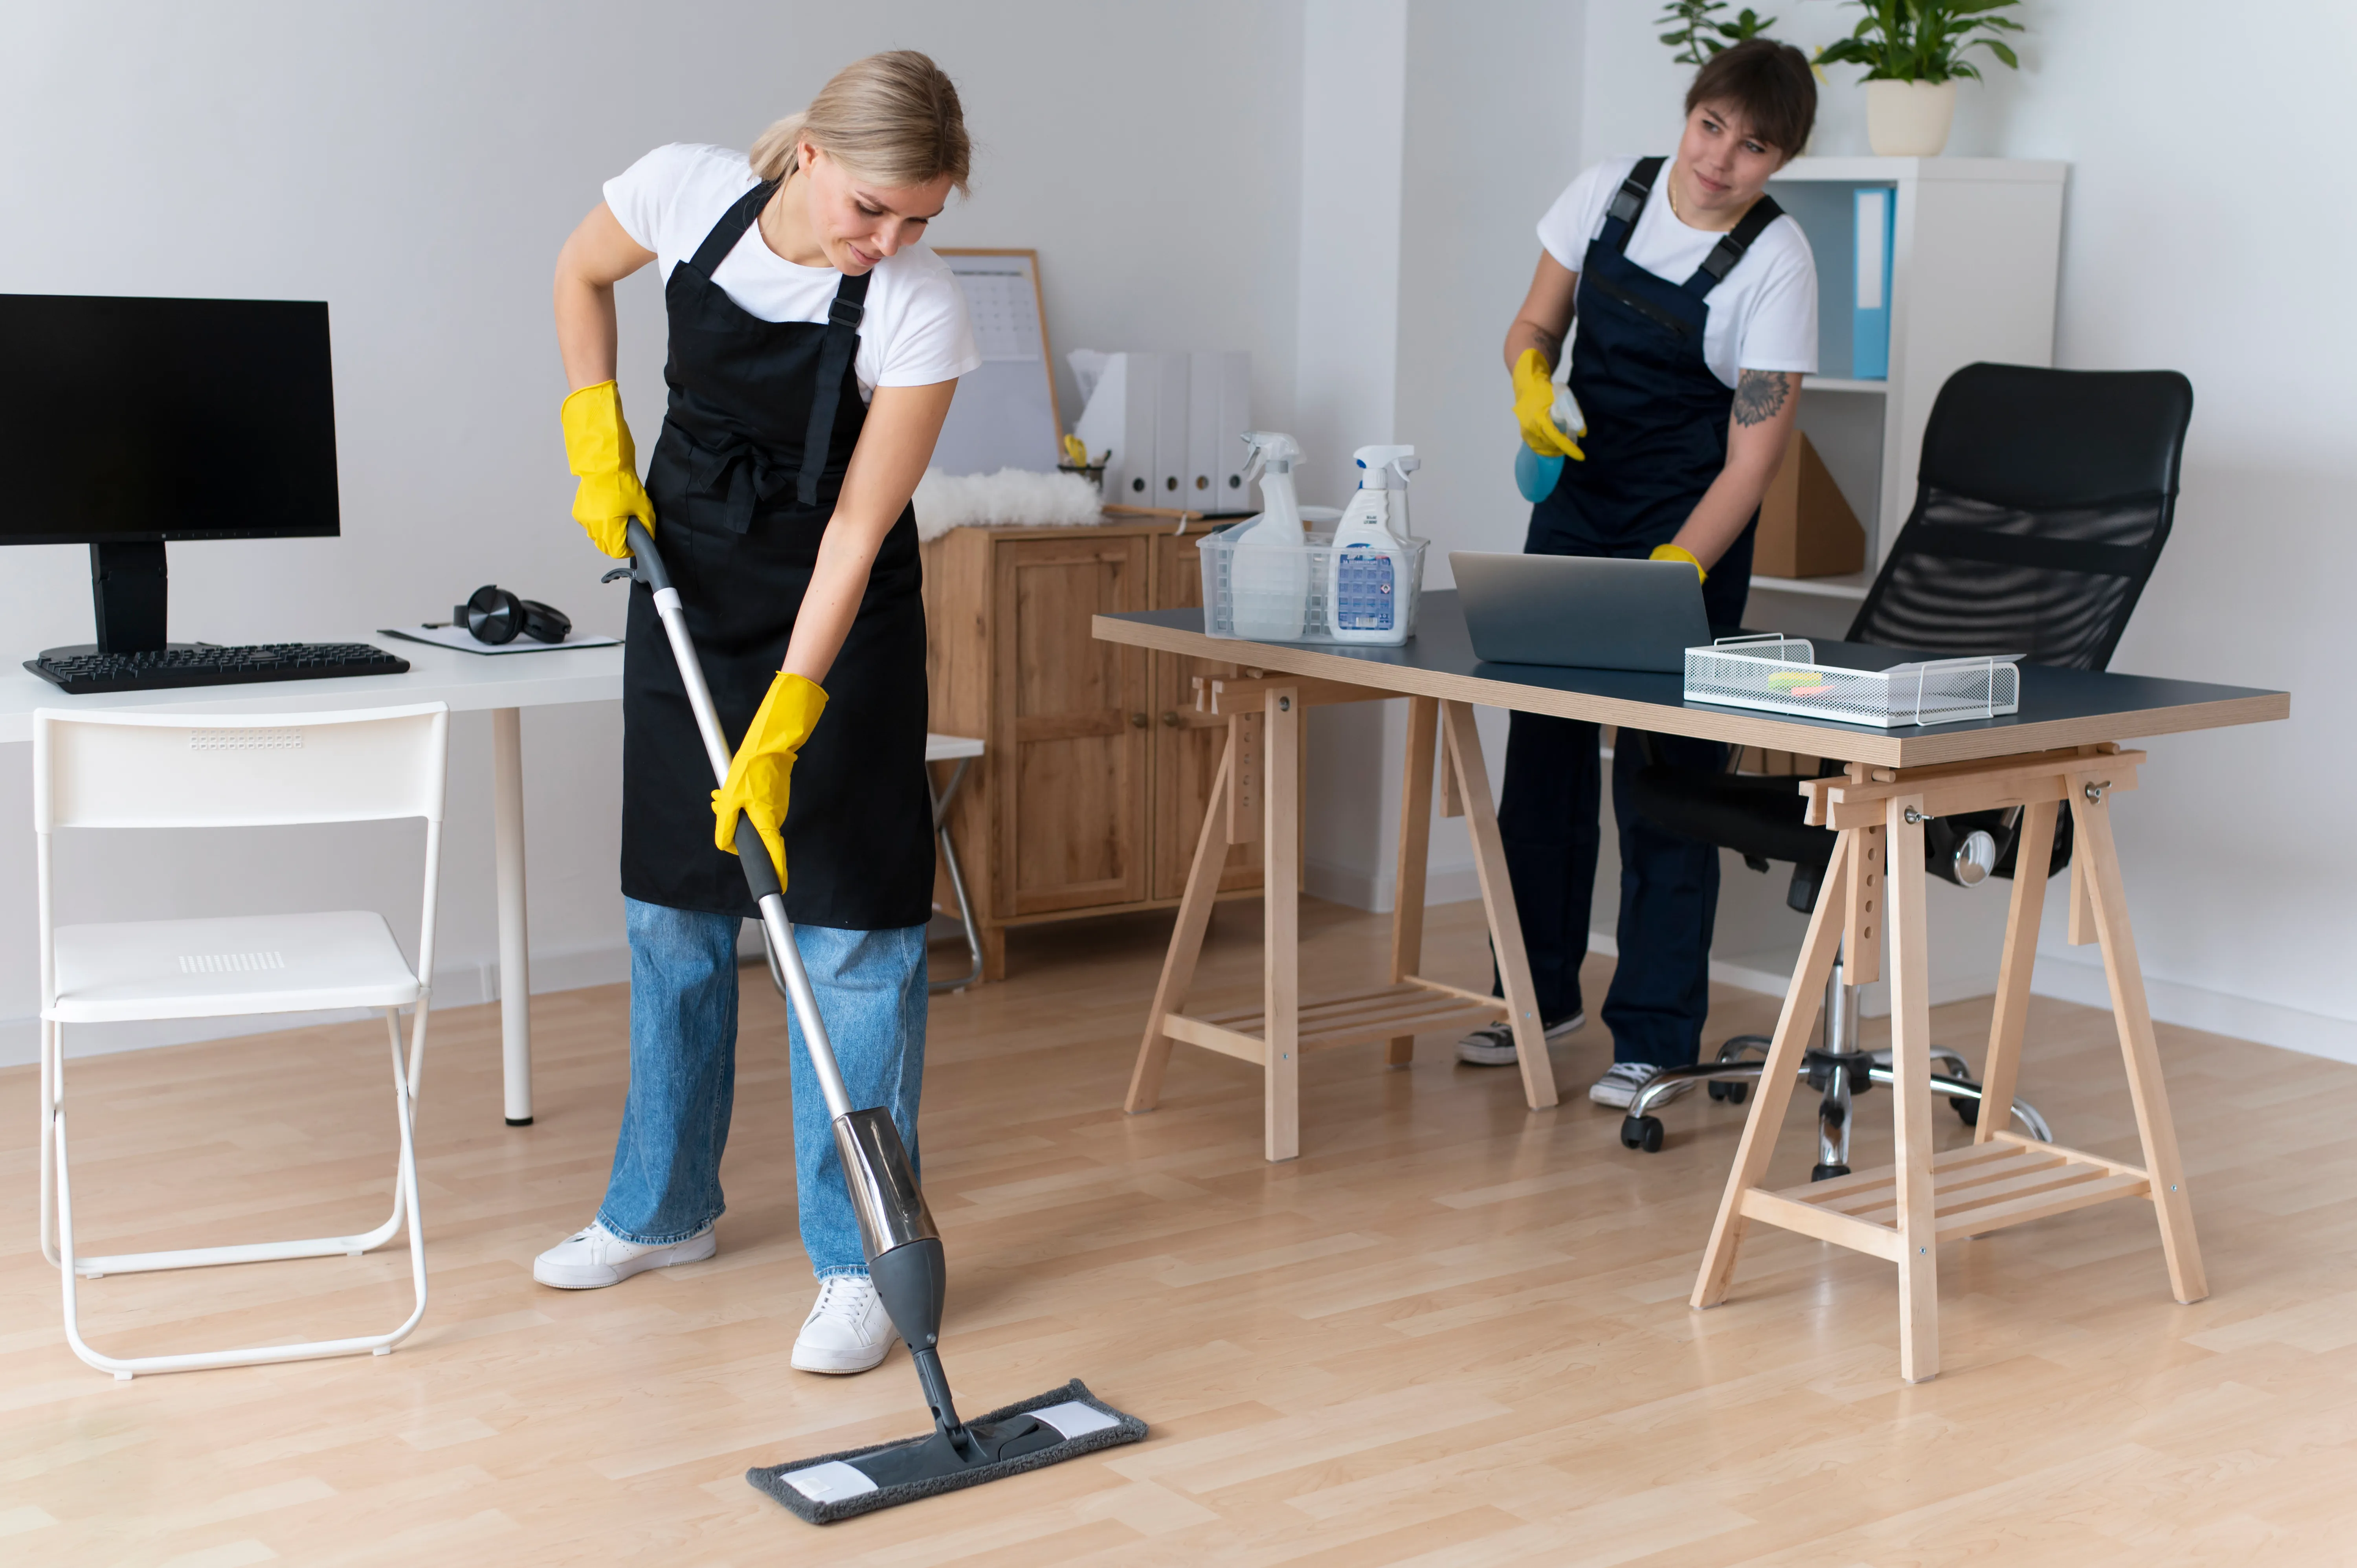 cleaning timber floors in an office